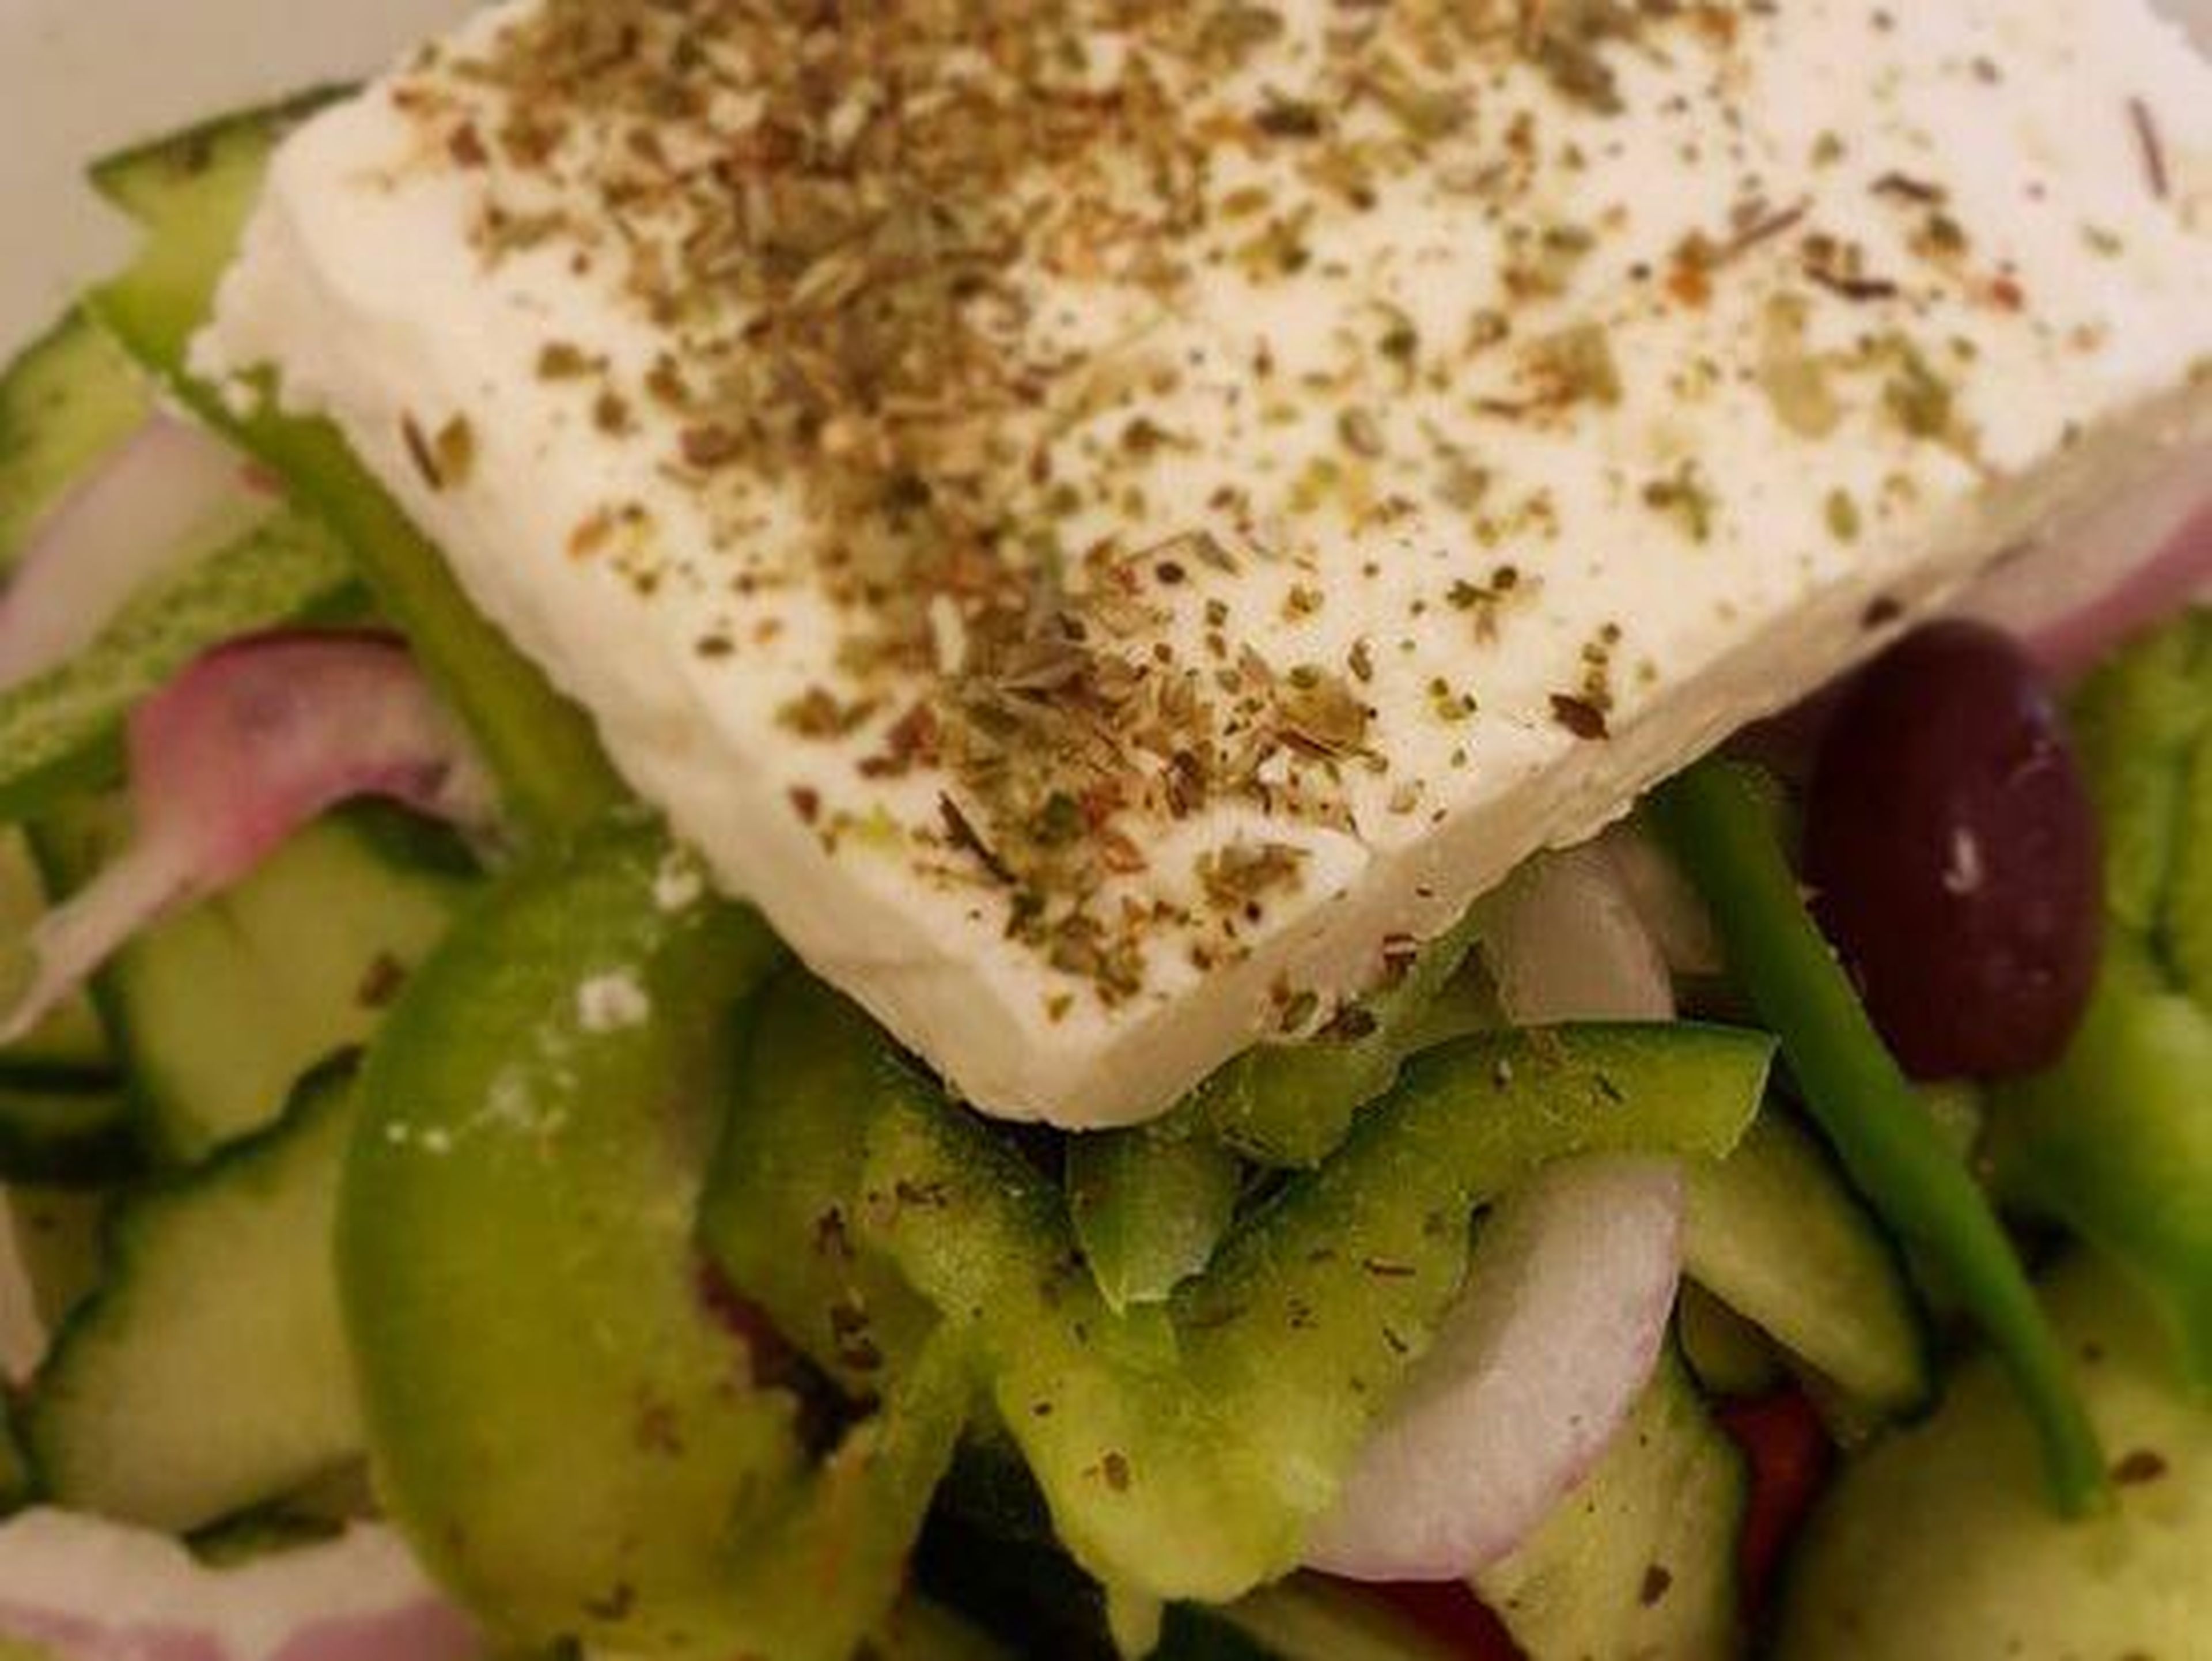 You can get an authentic Greek salad in Sparta's IKEA food court.